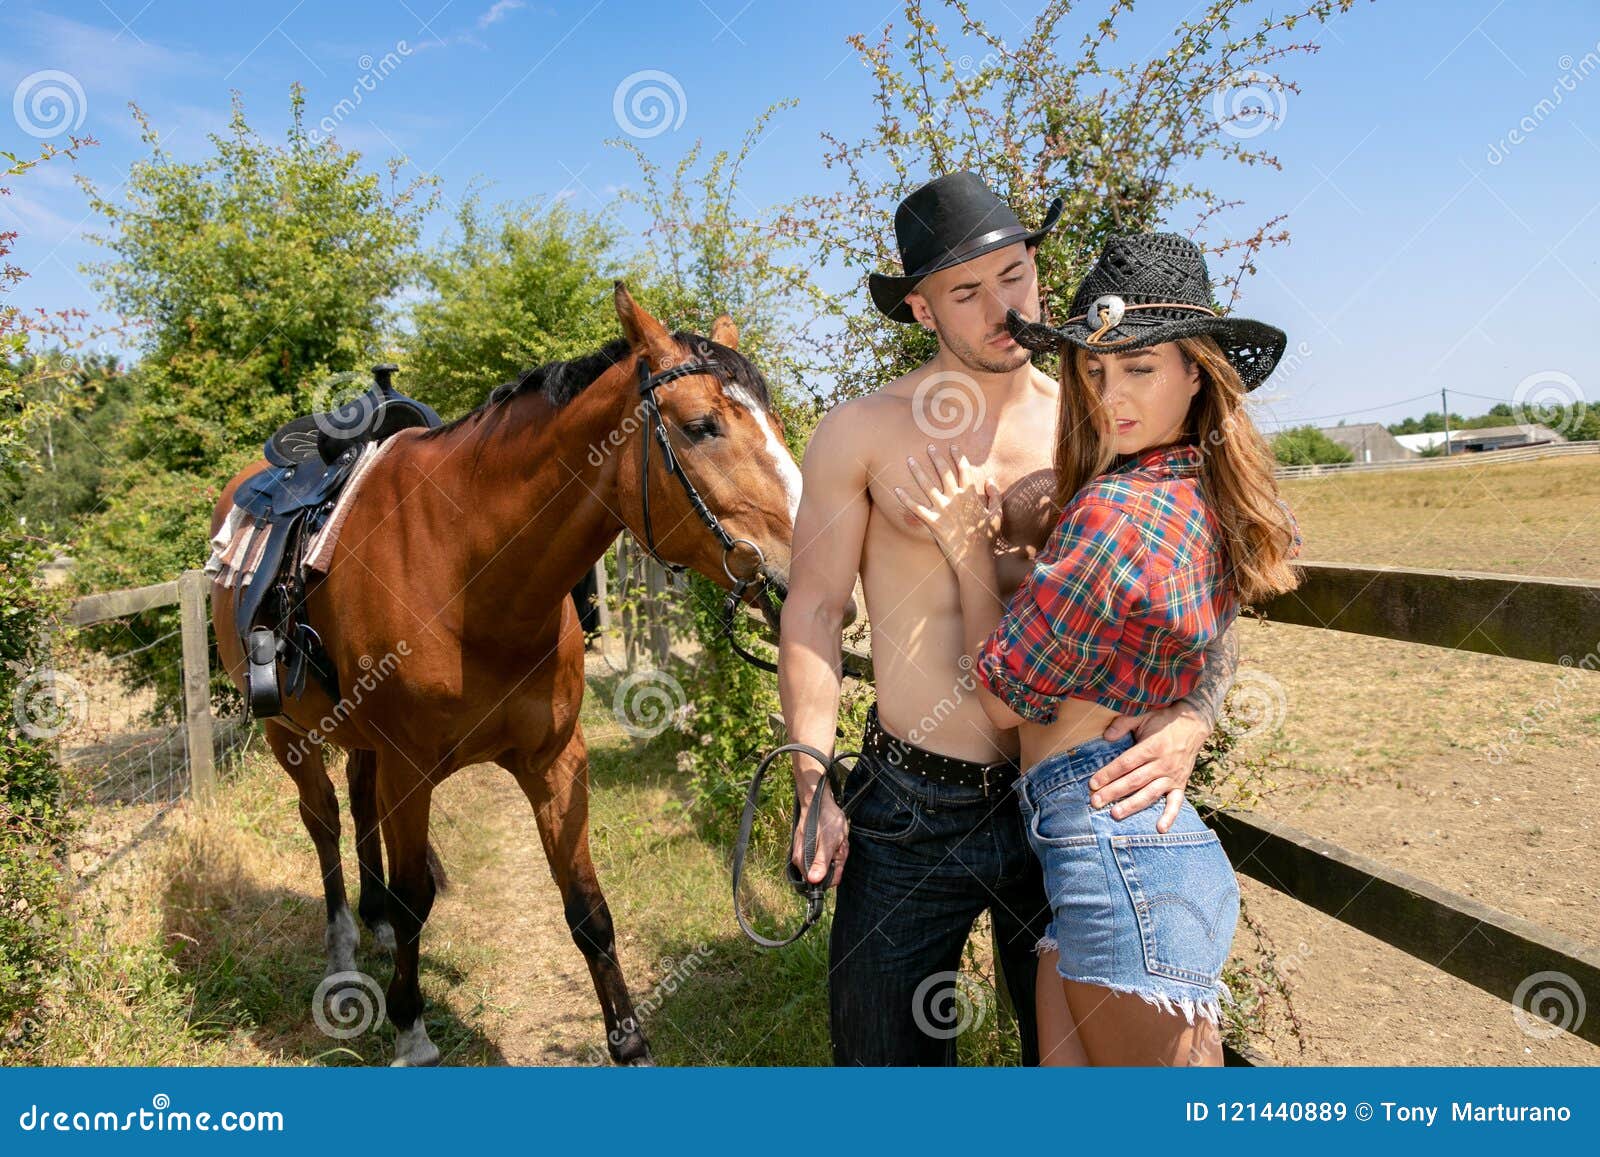 dan bulich recommends Cute Cowboy Cowgirl Rodeo Couple